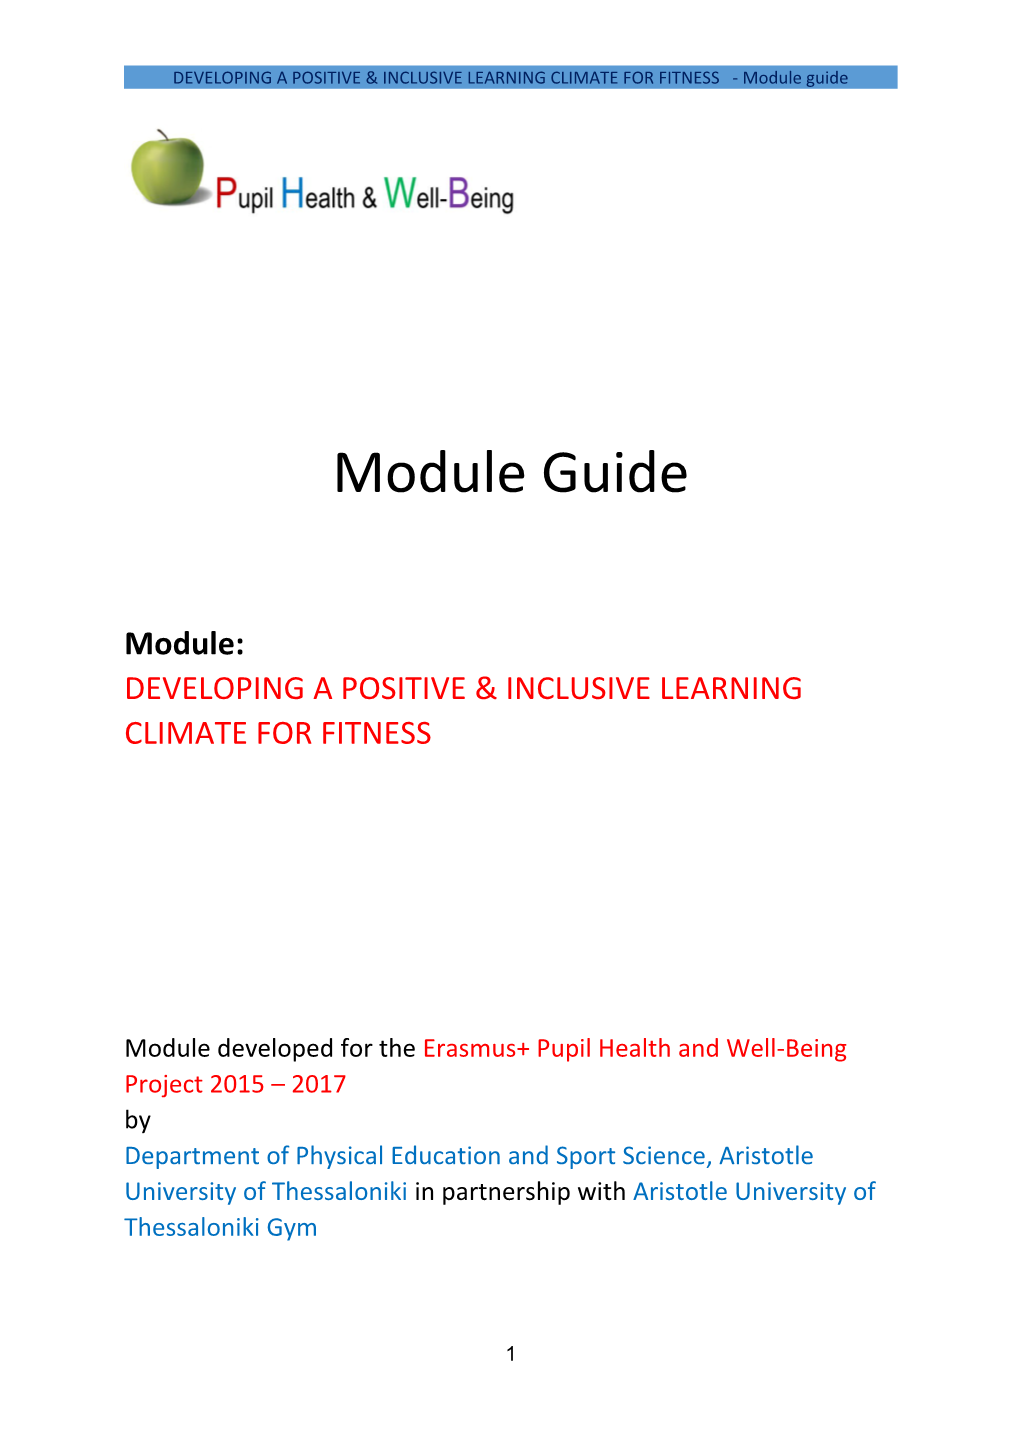 DEVELOPING a POSITIVE & INCLUSIVE LEARNING CLIMATE for FITNESS - Module Guide